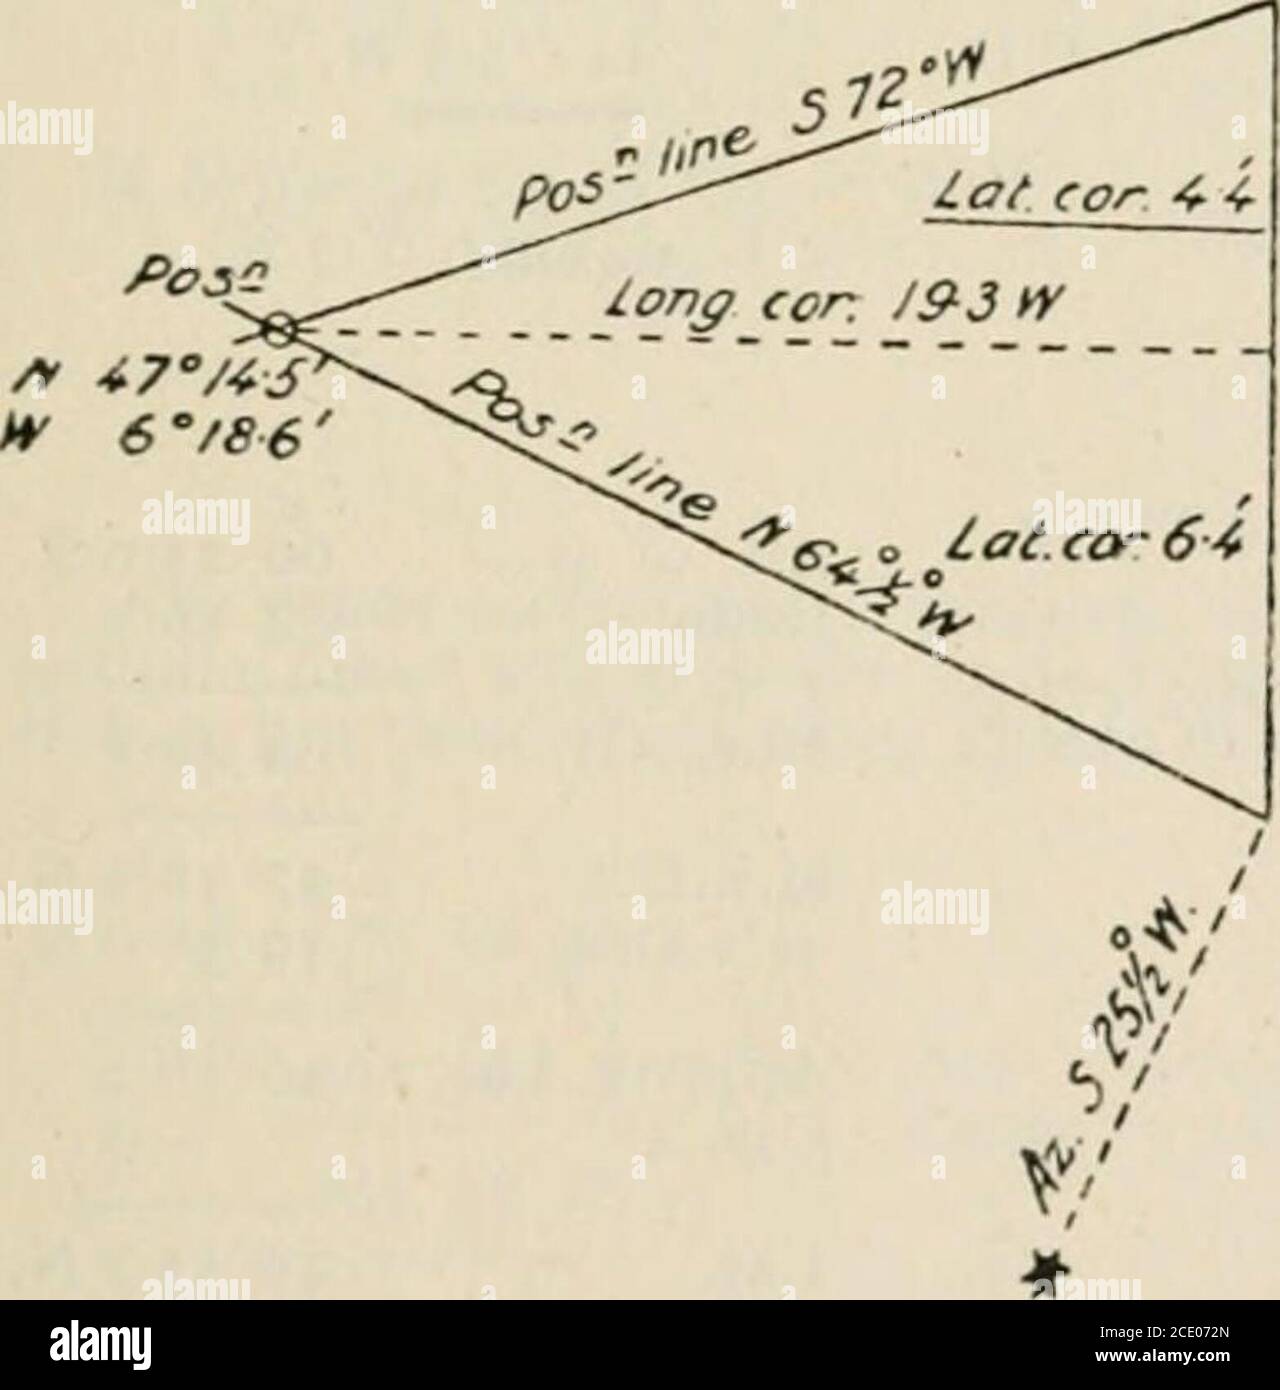 . Tables of calculated hour-angles and altitude azimuth table 30N. to 30S. : ex-meridian tables 60N. to 60S. and calculated reductions ans azimuths of bright stars from 1 hour to 3 hours from Meridian / c by H.S. Blackburne . M.T. Green. 6 35 47Long. 6° W. - 24 o H. M. s.Sid. T, (Green, noon) 23 14 9*53Accl. 6 h. 35j m. i 5*02 M.T. Sp.M. Os R.A. 6 II 4723 15 14^ Sid T. at Sp.?55-s R.A. 5 27 1-6 4 30 55-9 -VrsH.A. 0 56 57 M. 0s R.A.Accl. 2nd Obsn. 23 15 i455+ 0-8 23 IS i54 -;r s bearing from Table S. 255 W.Position-Line N. 64-5 W. M. N. E.Run N. 28 E. io=o9 o5 = d. long. 07 E. Alt. of -Ir 57 6- Stock Photo